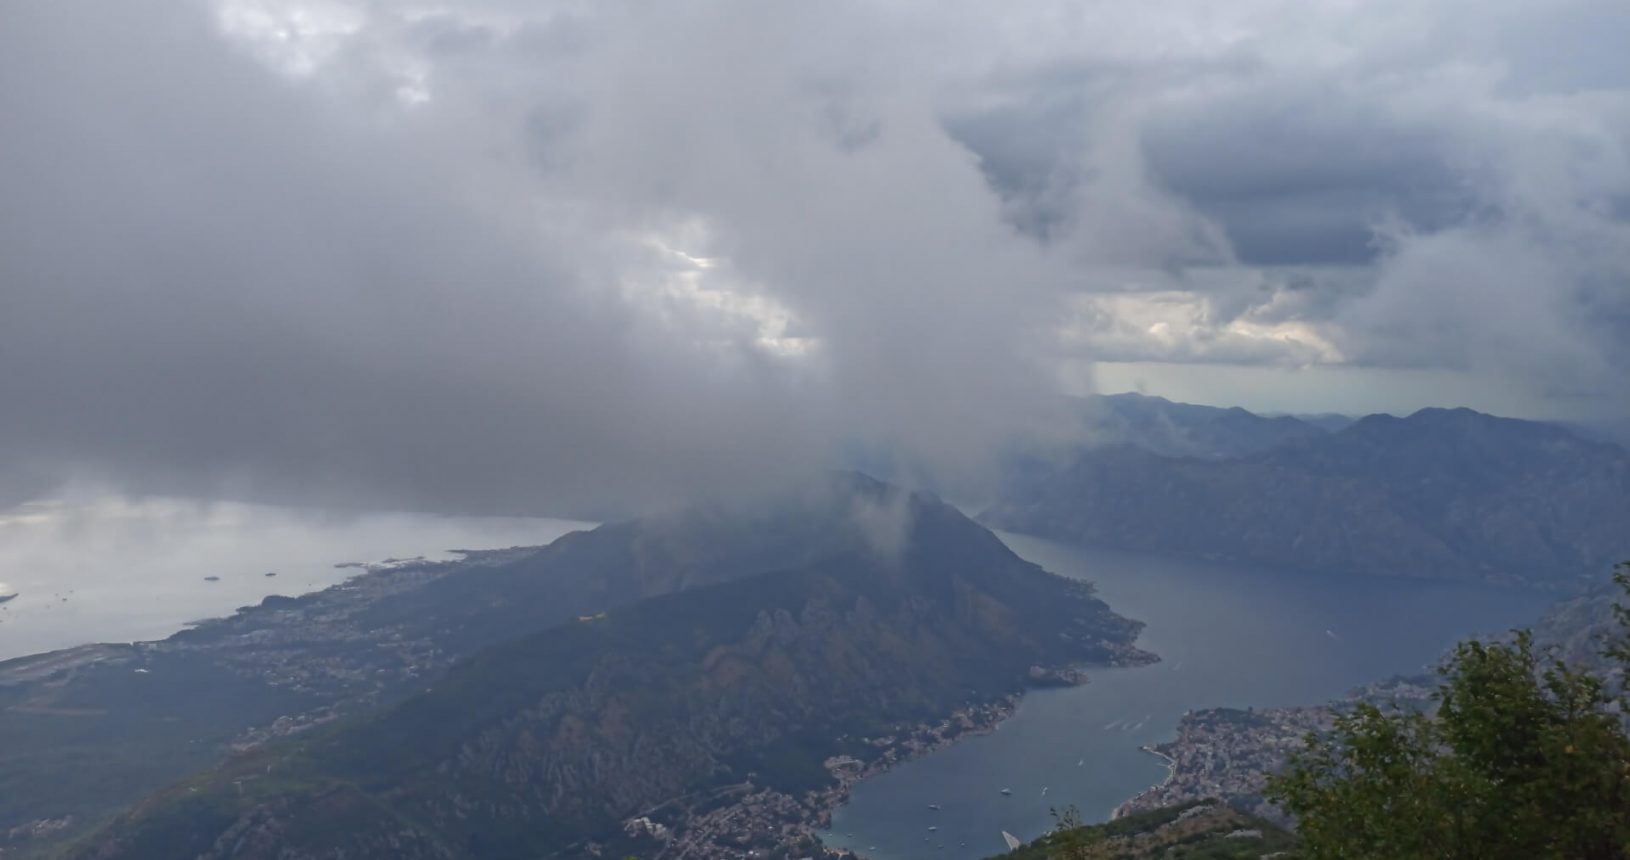 View point for Kotor and Tivat Bay moving skies